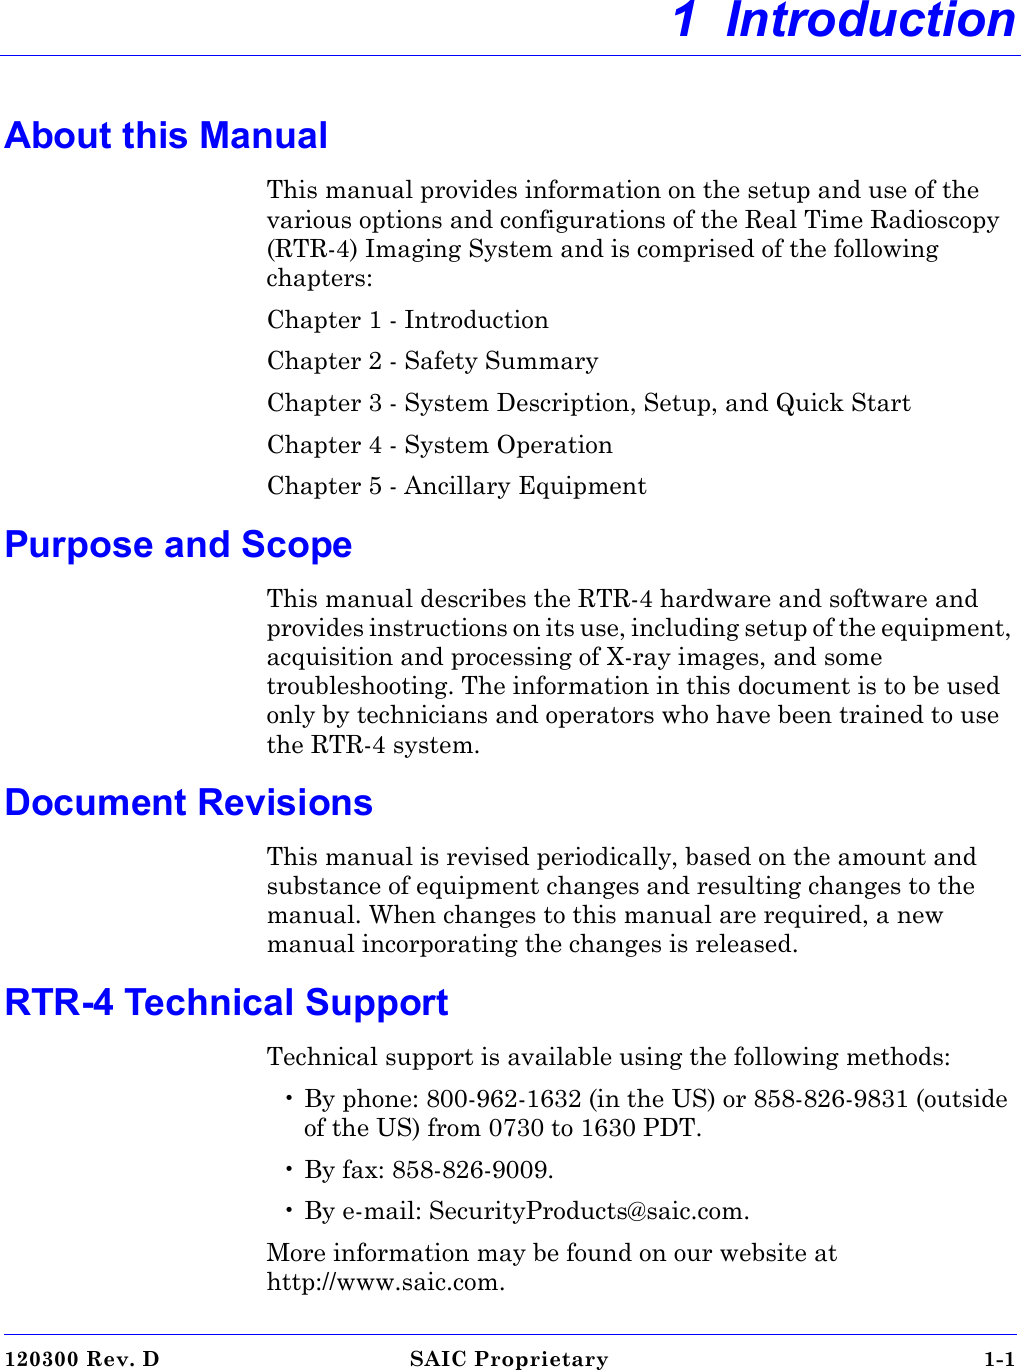 120300 Rev. D SAIC Proprietary 1-1 1  IntroductionAbout this ManualThis manual provides information on the setup and use of the various options and configurations of the Real Time Radioscopy (RTR-4) Imaging System and is comprised of the following chapters:Chapter 1 - IntroductionChapter 2 - Safety SummaryChapter 3 - System Description, Setup, and Quick StartChapter 4 - System OperationChapter 5 - Ancillary EquipmentPurpose and ScopeThis manual describes the RTR-4 hardware and software and provides instructions on its use, including setup of the equipment, acquisition and processing of X-ray images, and some troubleshooting. The information in this document is to be used only by technicians and operators who have been trained to use the RTR-4 system.Document RevisionsThis manual is revised periodically, based on the amount and substance of equipment changes and resulting changes to the manual. When changes to this manual are required, a new manual incorporating the changes is released.RTR-4 Technical SupportTechnical support is available using the following methods:• By phone: 800-962-1632 (in the US) or 858-826-9831 (outside of the US) from 0730 to 1630 PDT.• By fax: 858-826-9009.• By e-mail: SecurityProducts@saic.com. More information may be found on our website at http://www.saic.com.